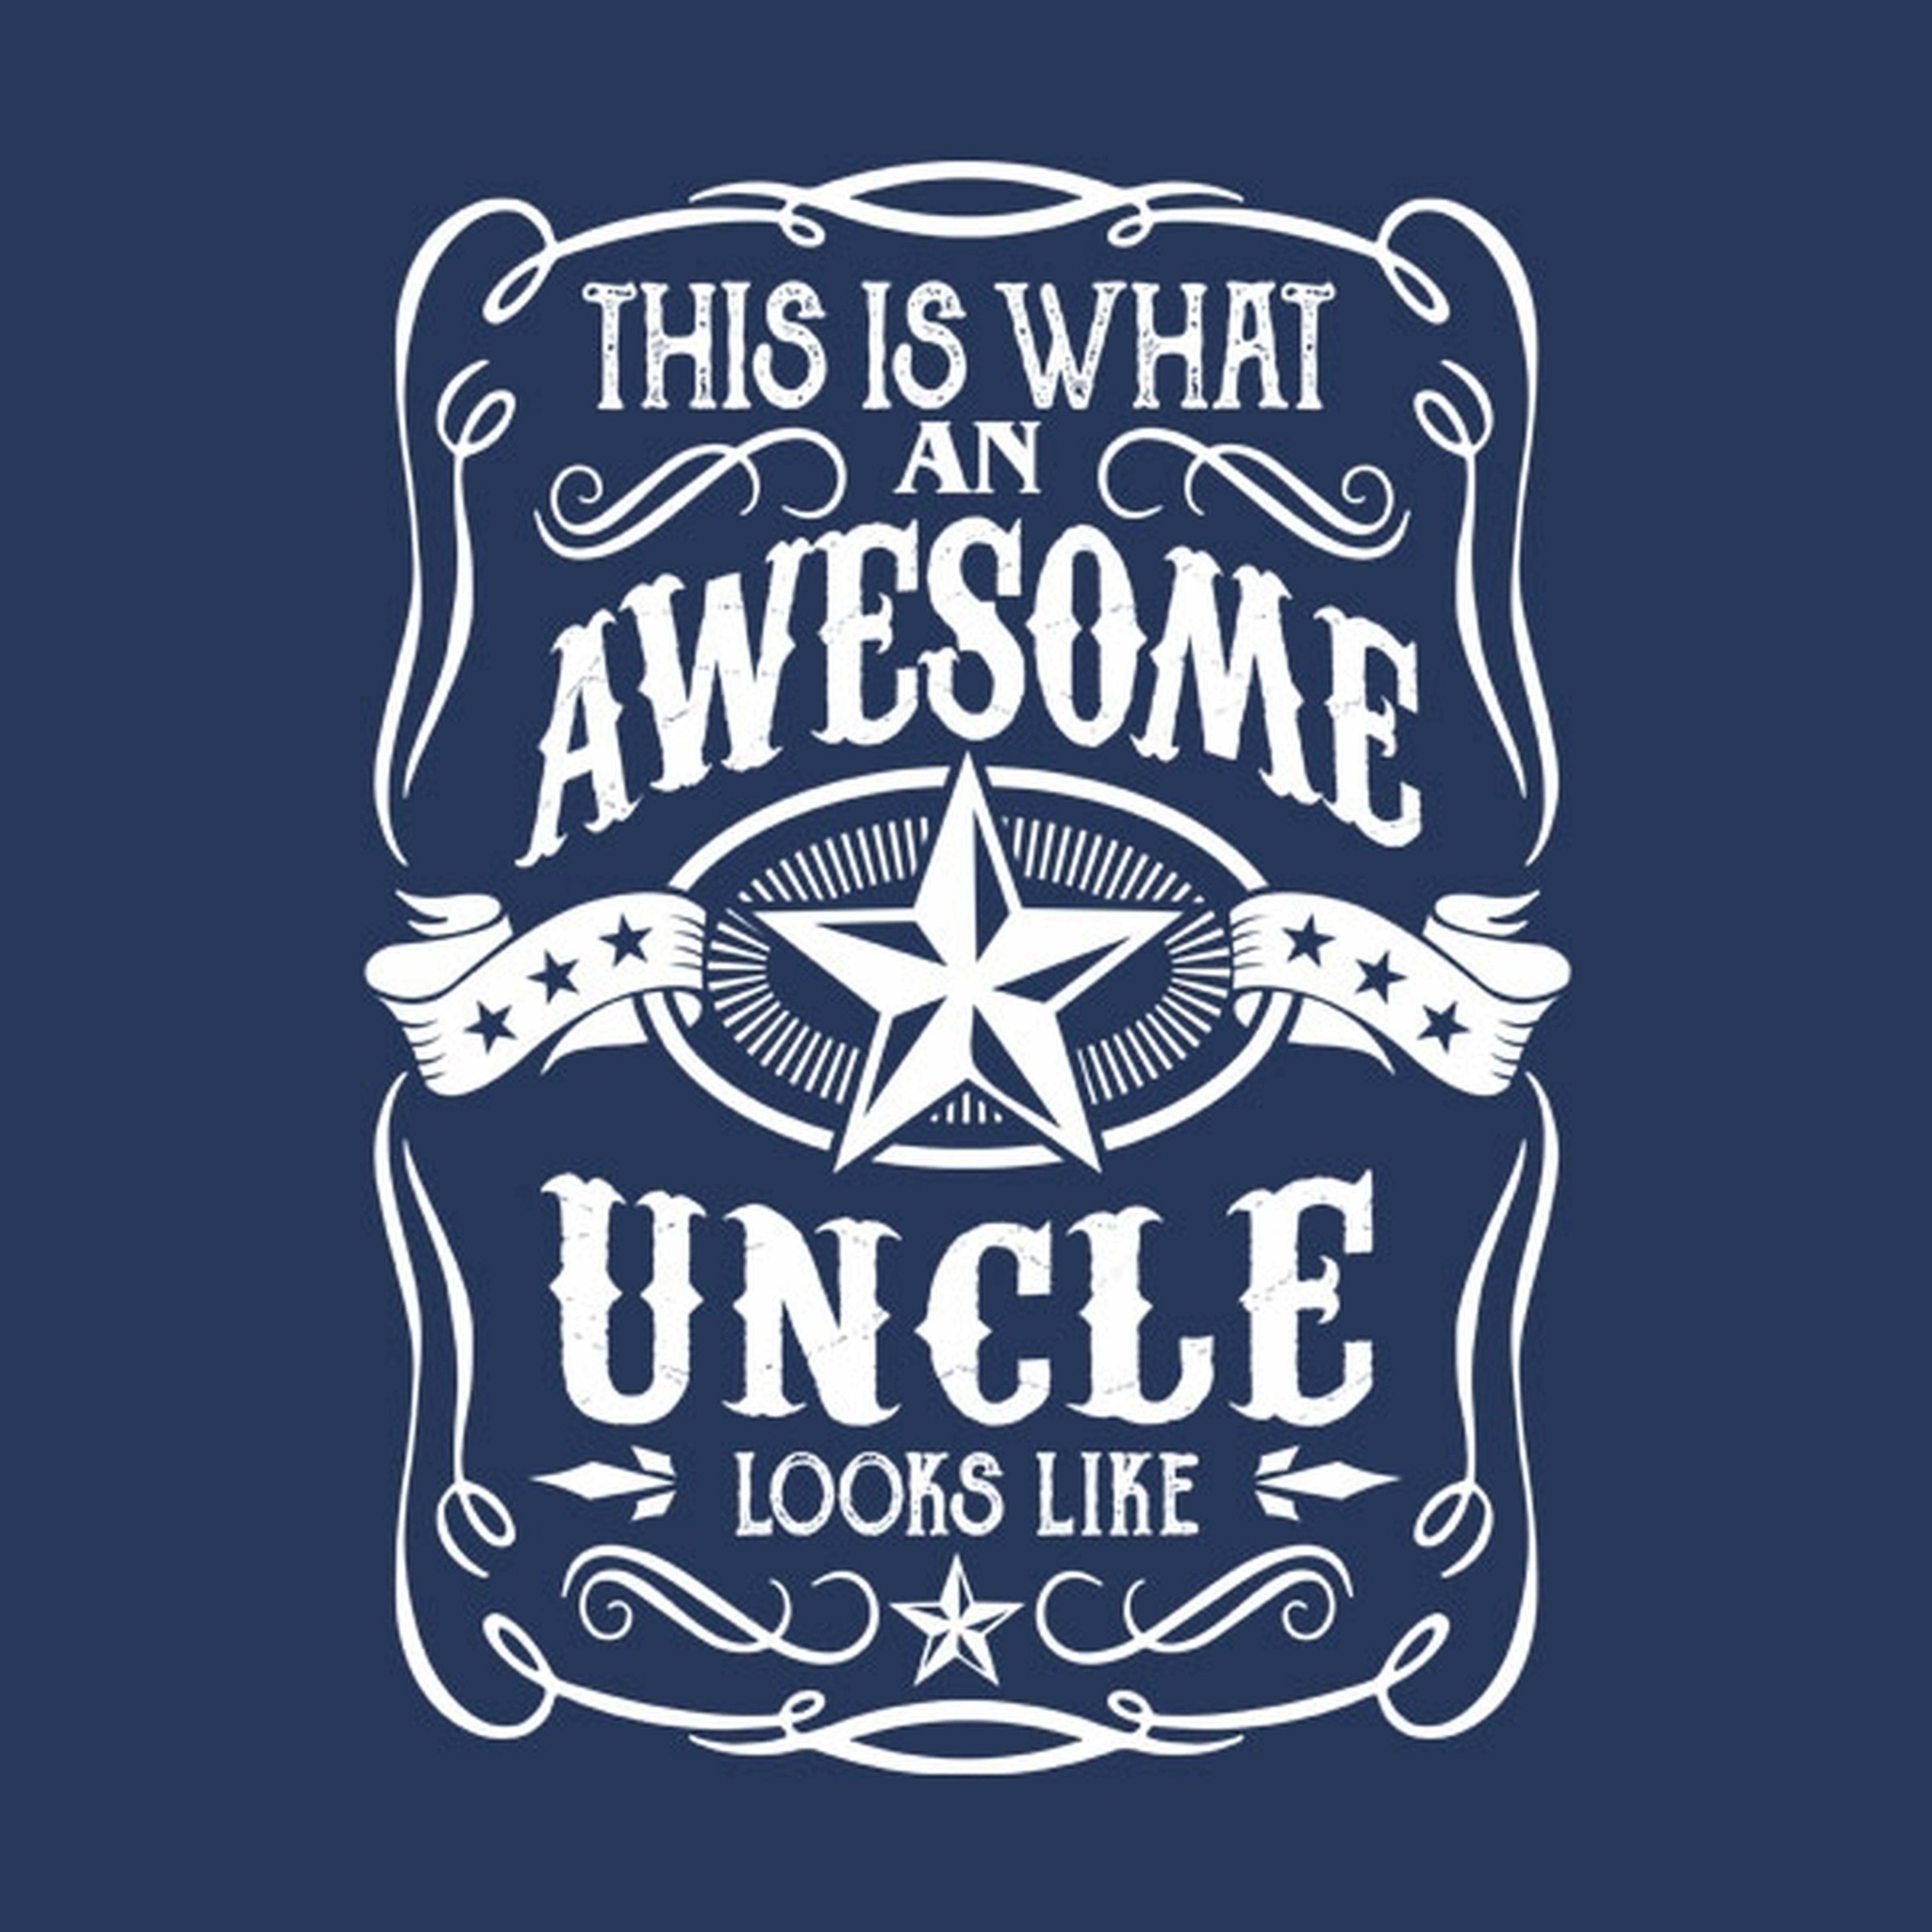 This is what an awesome uncle looks like - T-shirt